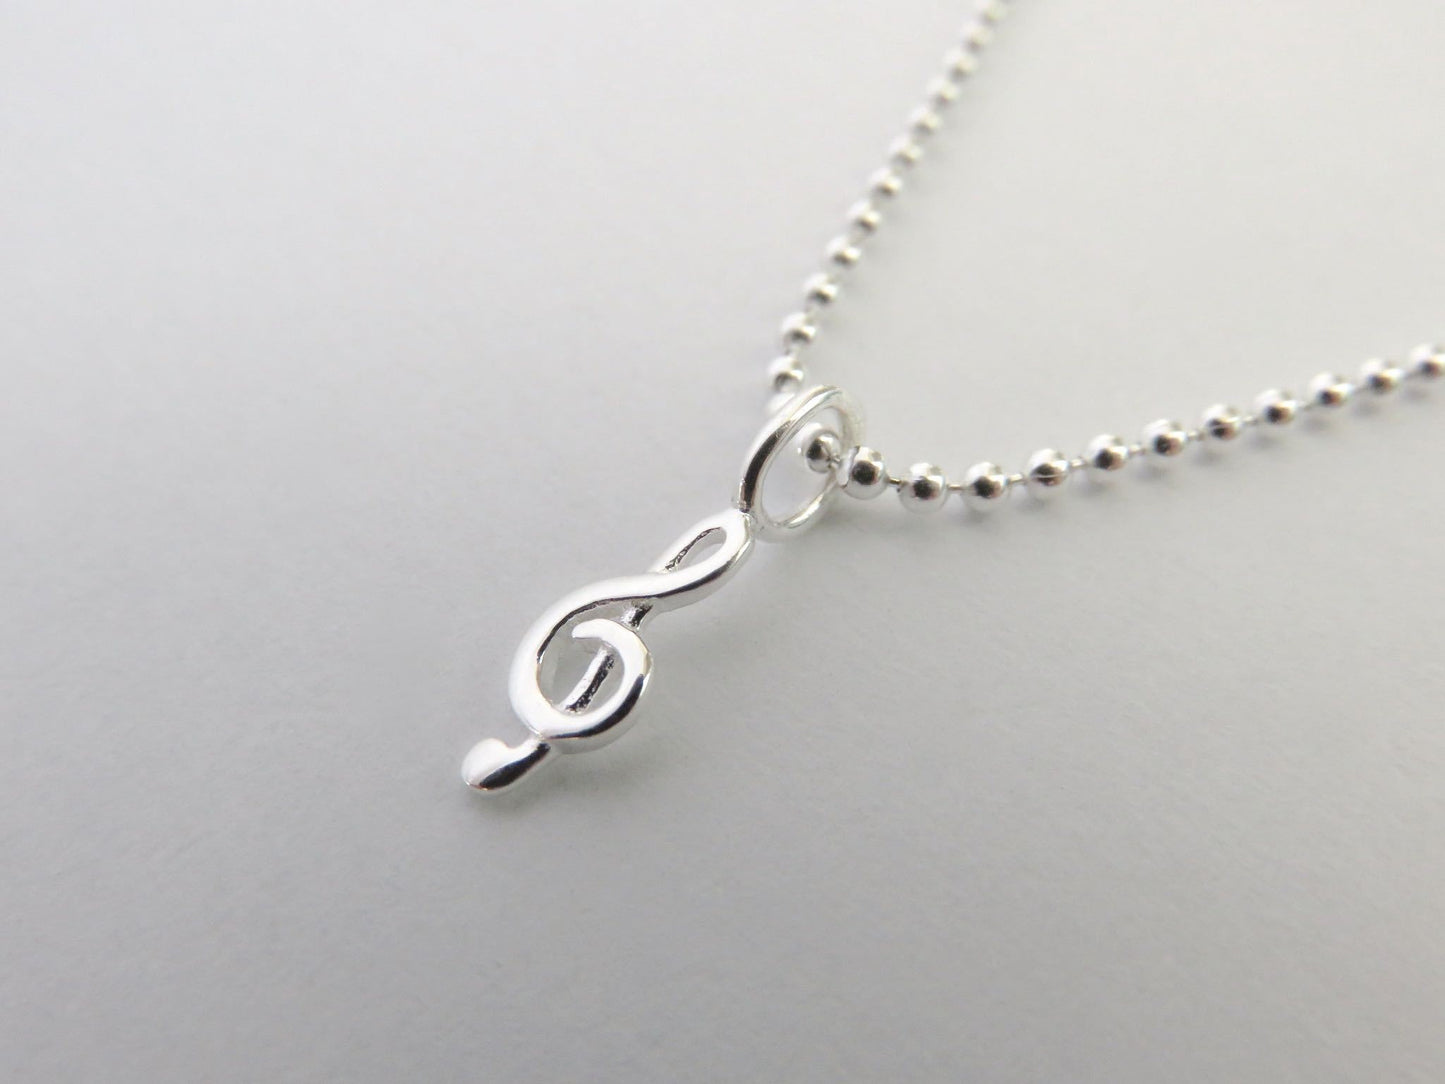 Ball chain with small treble clef made of silver